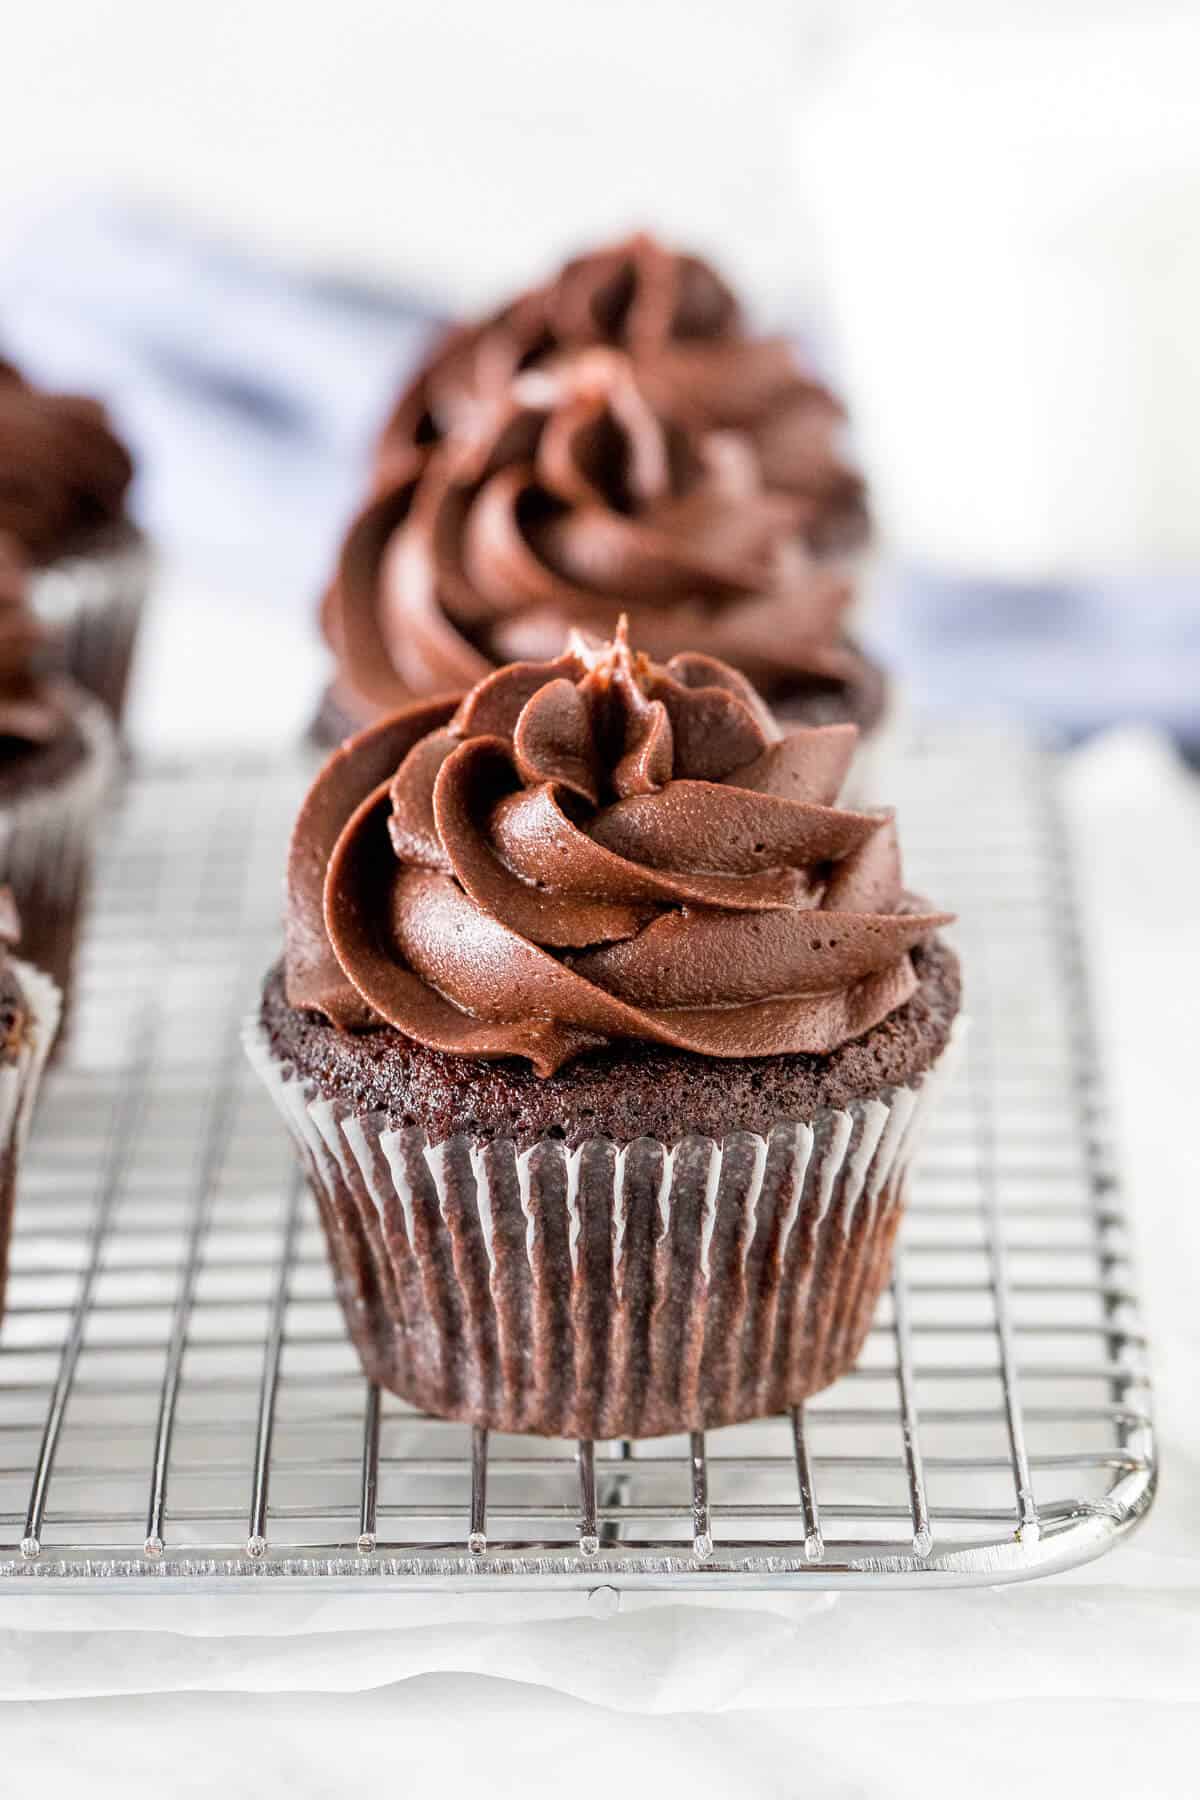 Chocolate cupcakes with chocolate frosting on cooling rack.